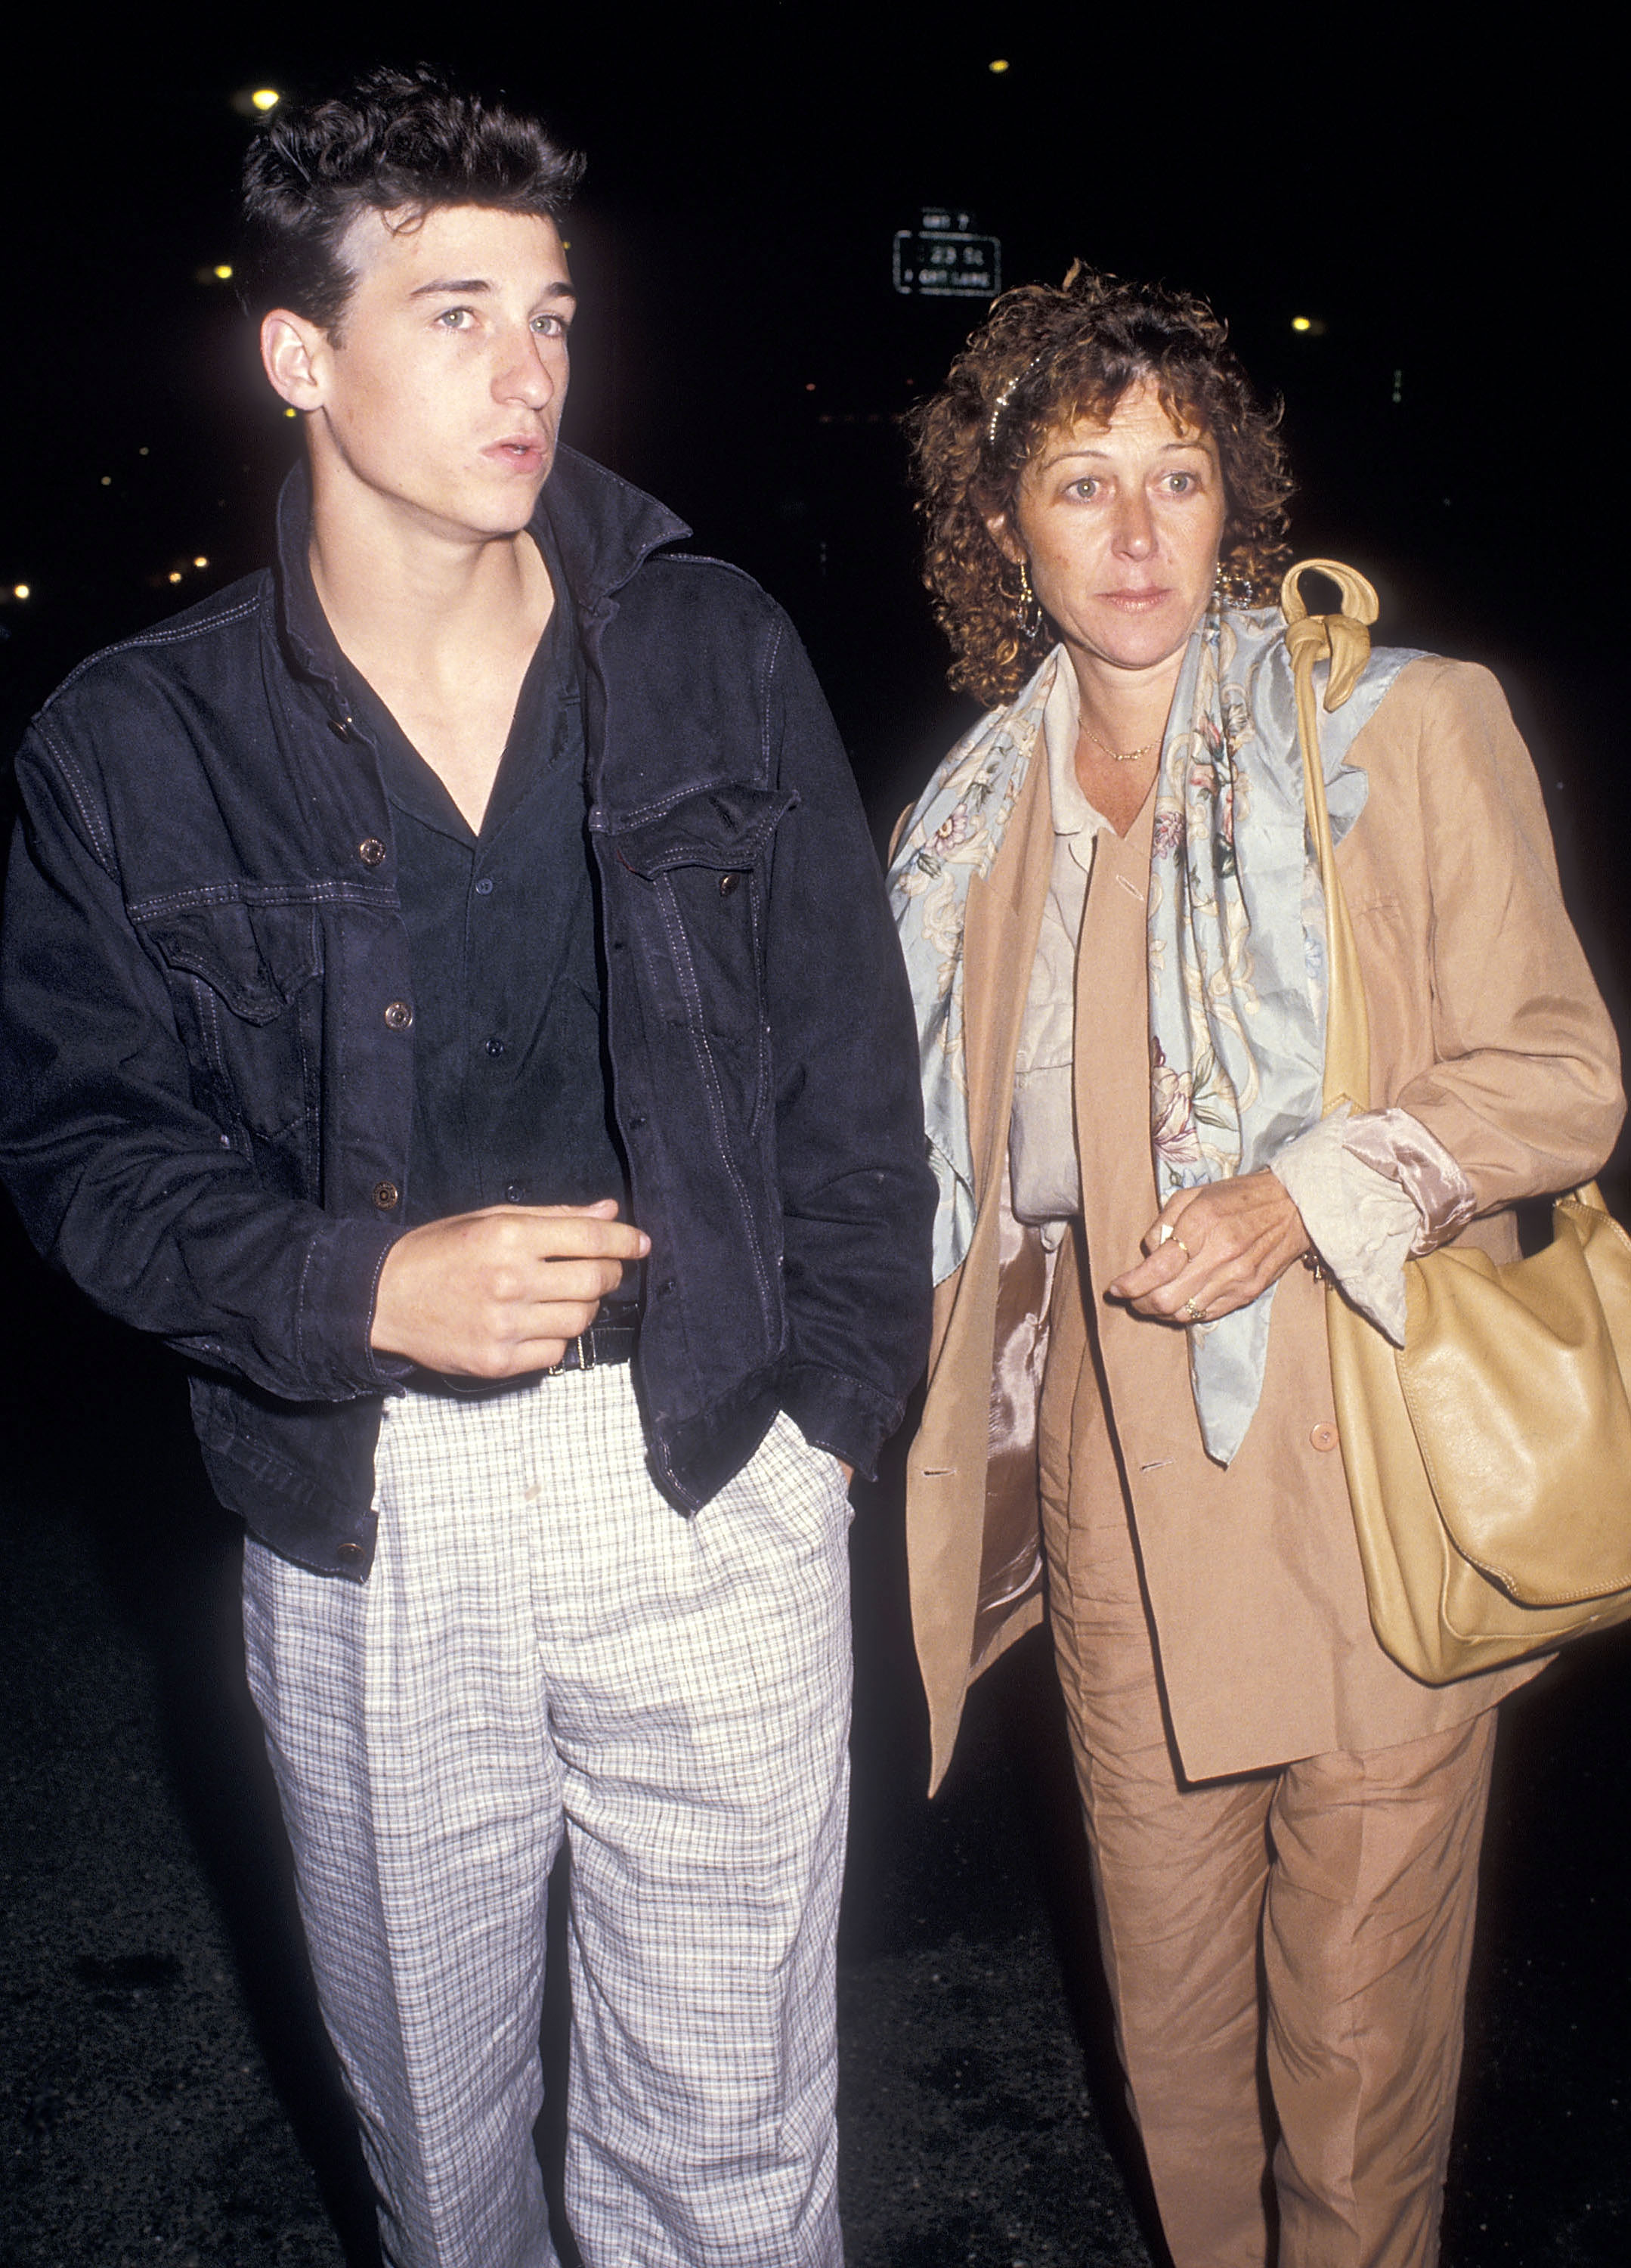 Patrick Dempsey and ex-wife Rocky Parker on August 24, 1987, at the Baronet Theater in New York City. | Source: Getty Images